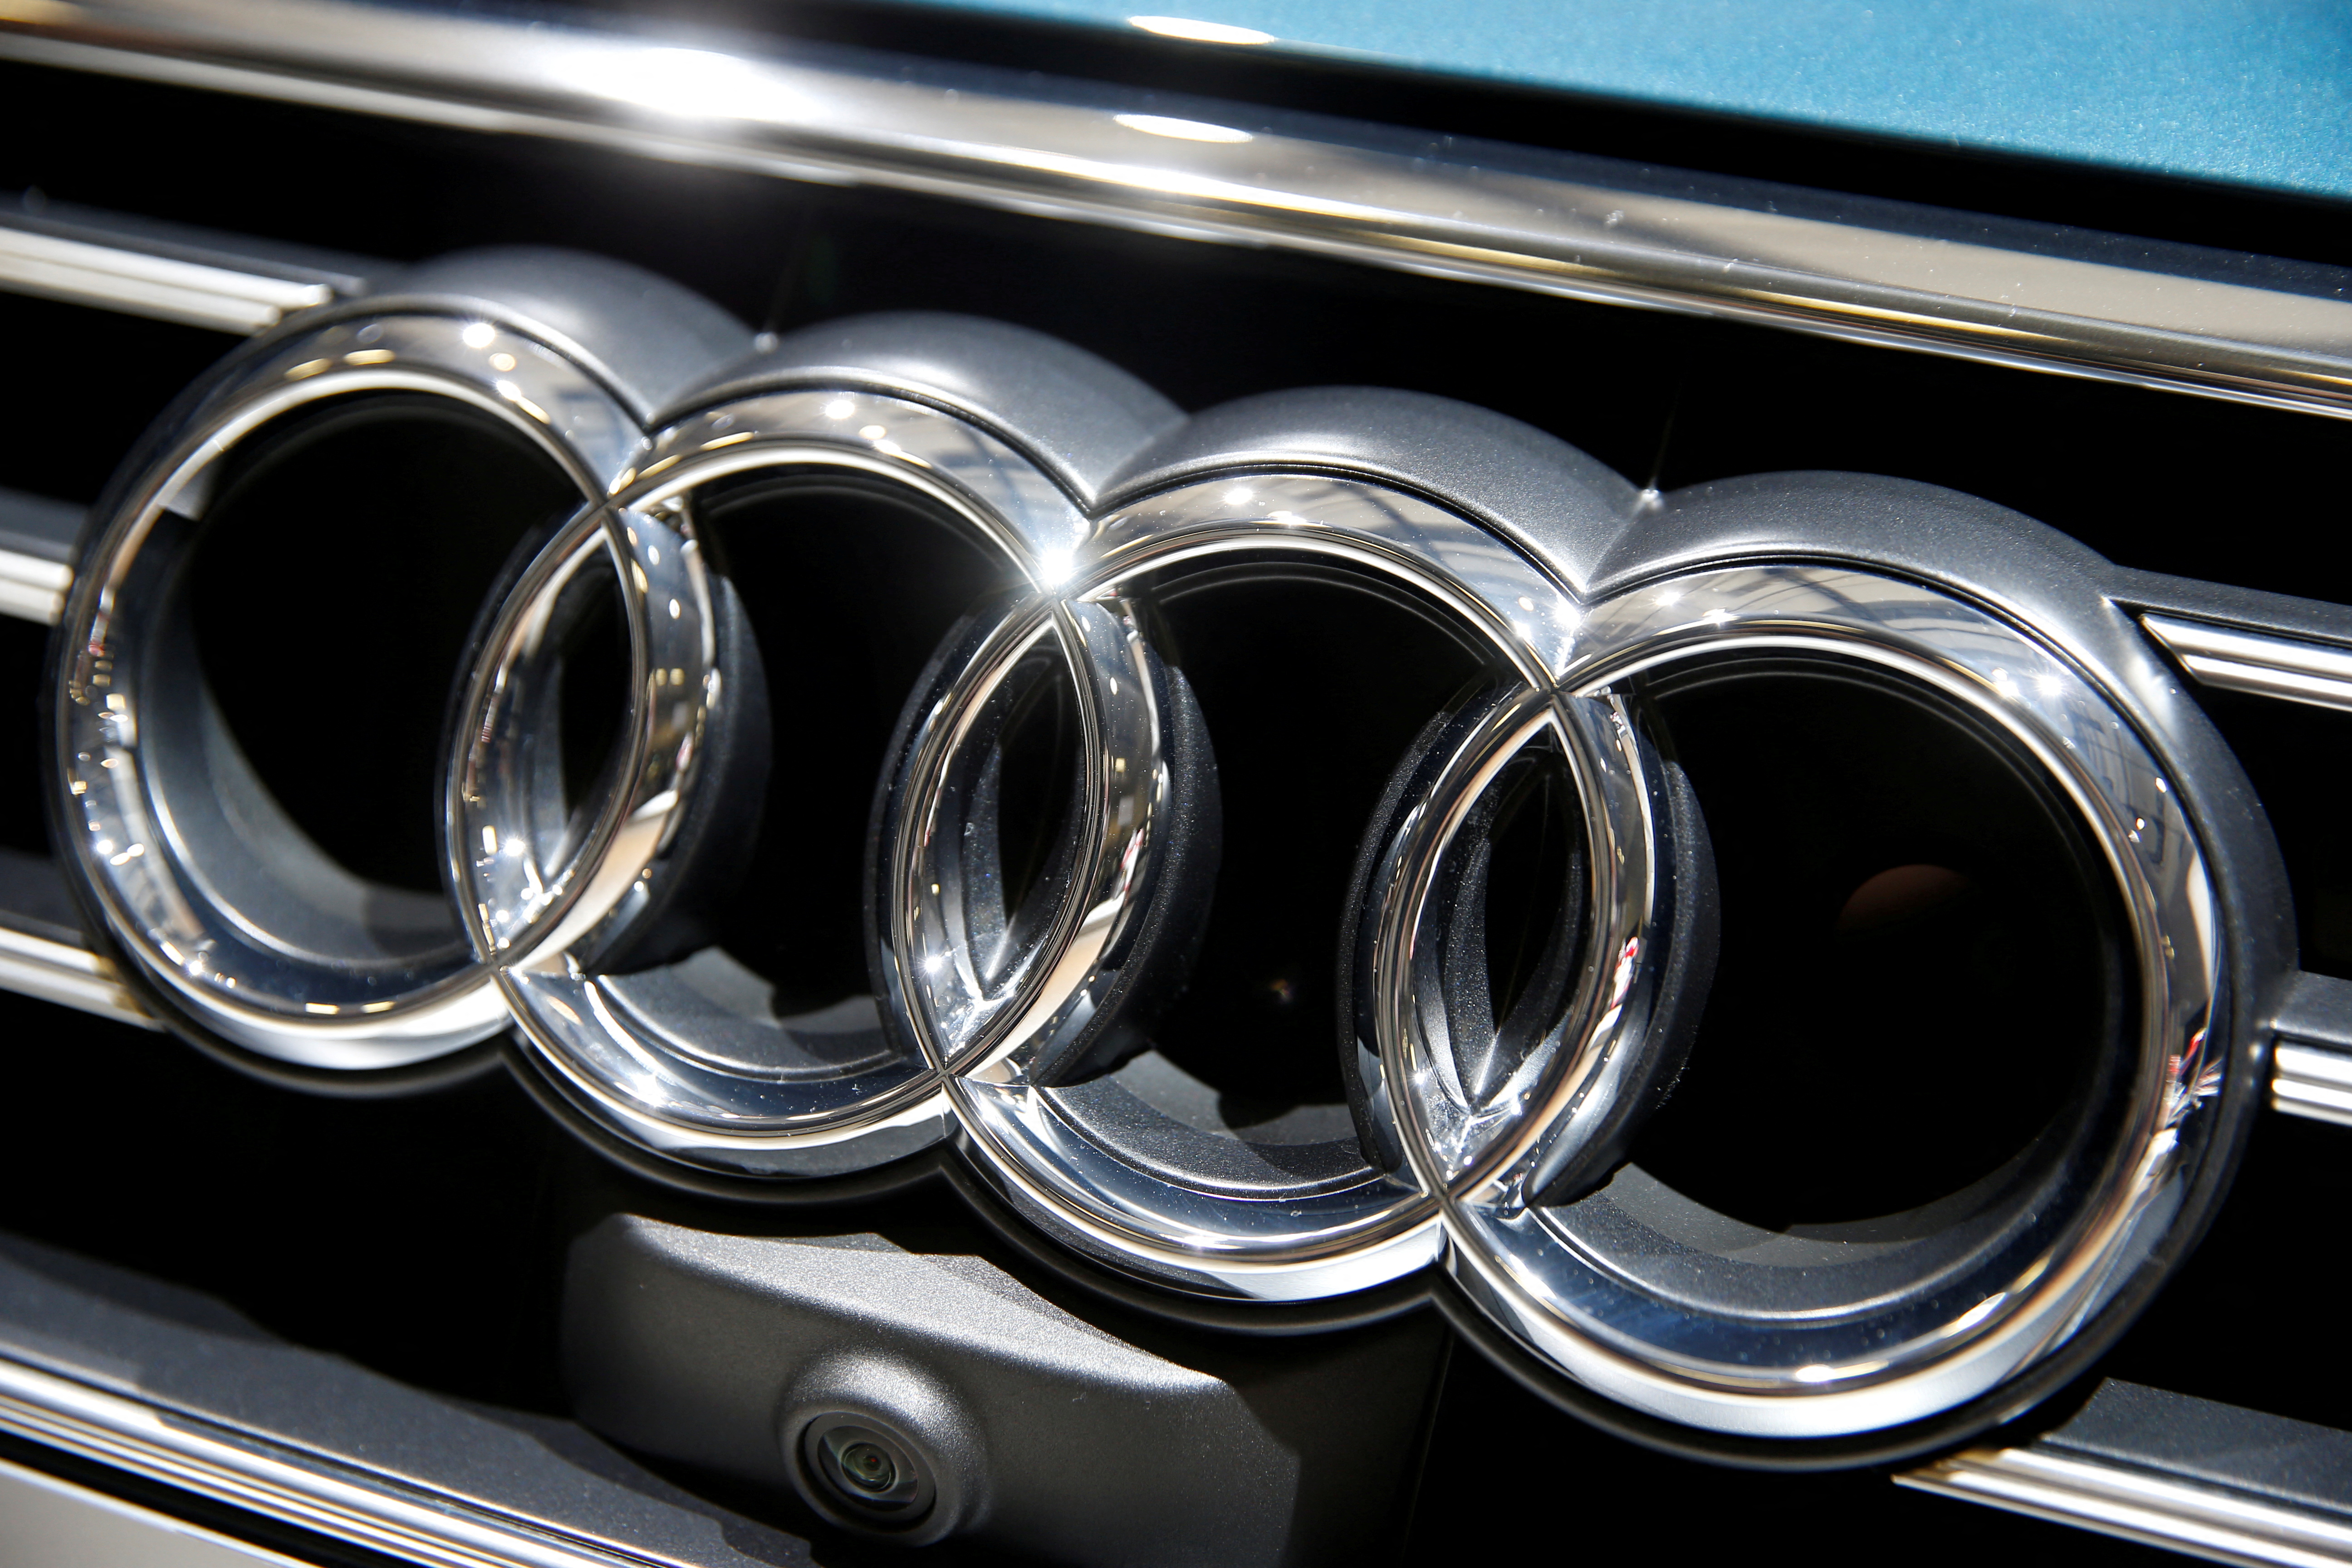 Audi logo is pictured during the Volkswagen Group's annual general meeting in Berlin